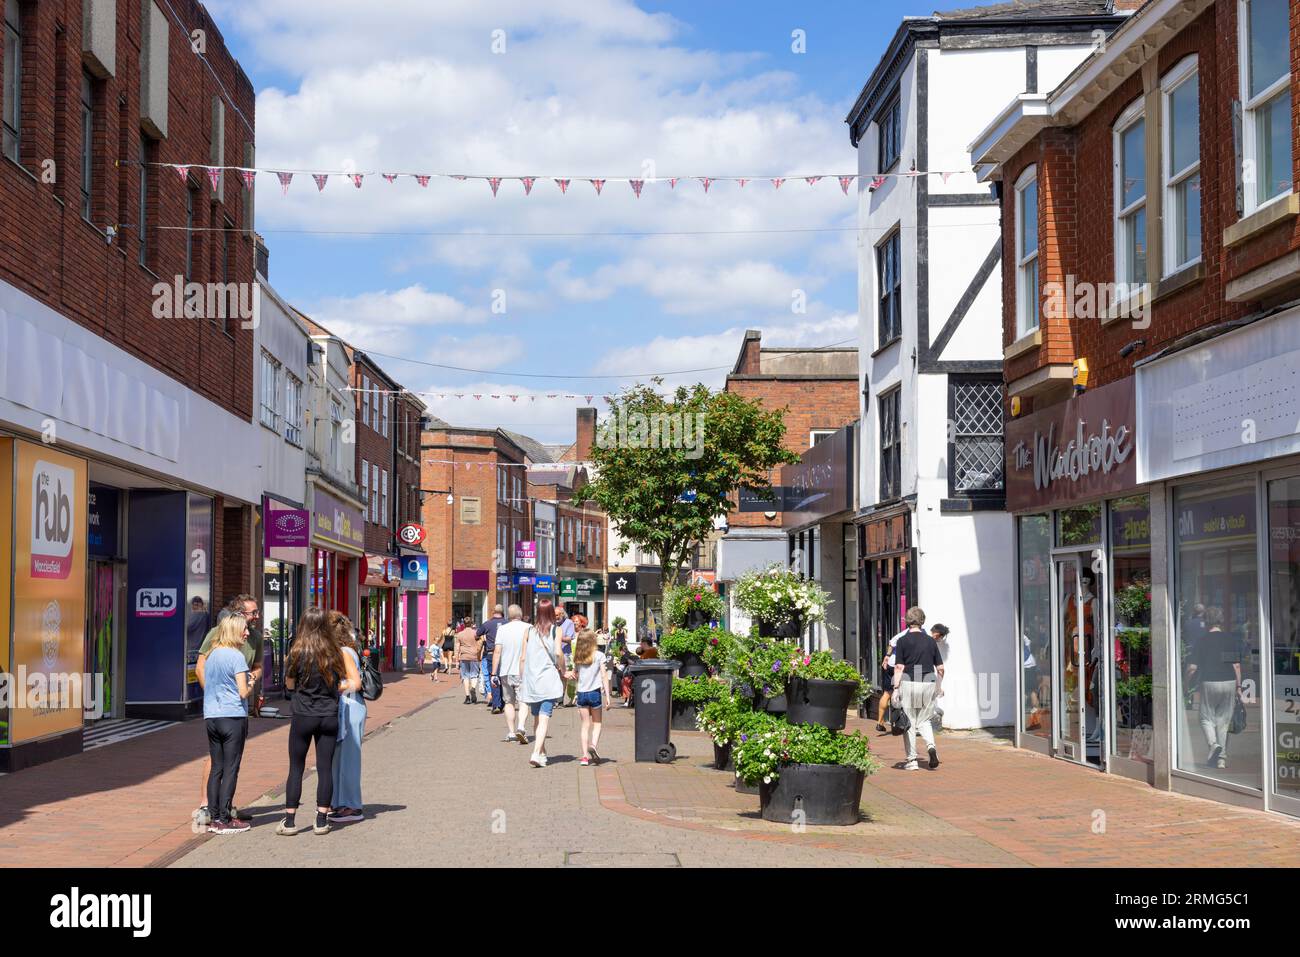 Macclesfield Cheshire Macclesfield Town Centre Mill Street Shops und Shoppers Macclesfield Cheshire East England UK GB Europa Stockfoto